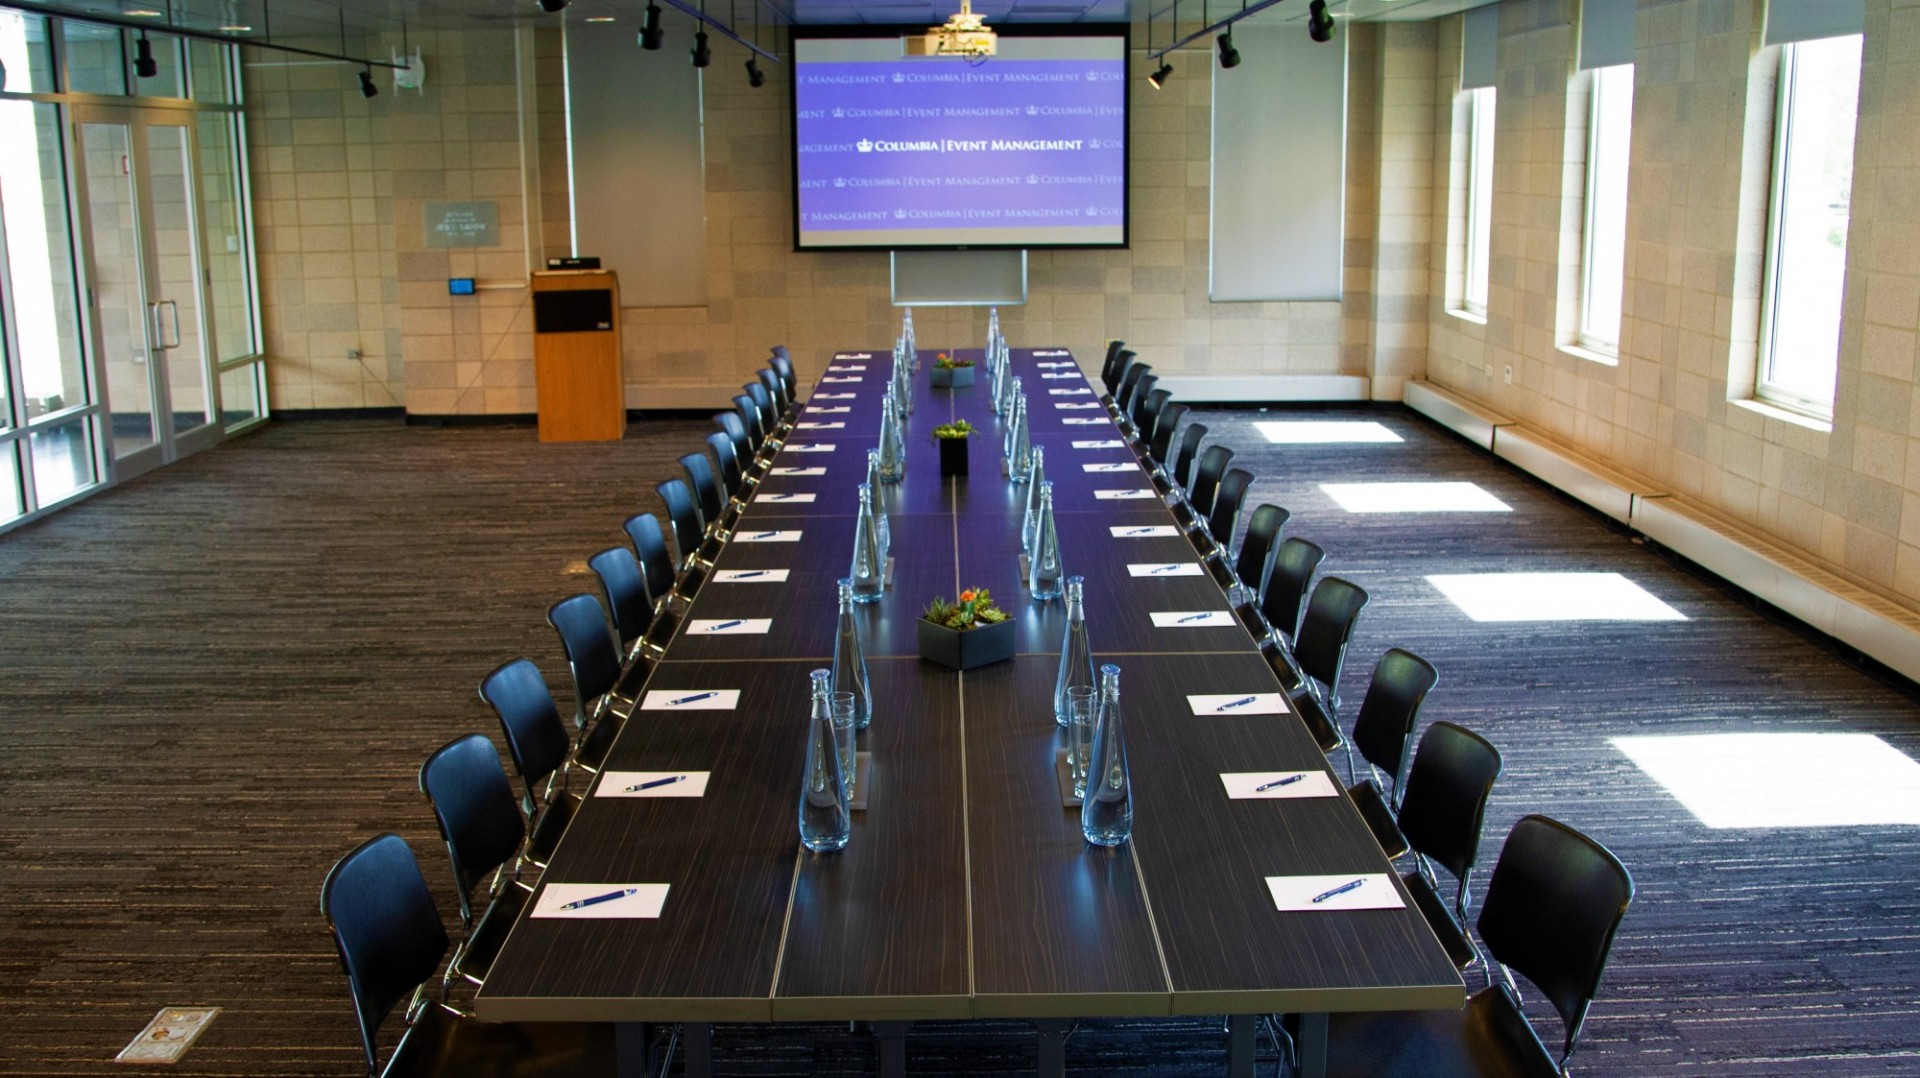 A long, rectangular conference table is in the middle of a grey-carpeted room. The table is set with water glasses and pitchers. A projector screen is mounted on a wall perpendicular from the table.